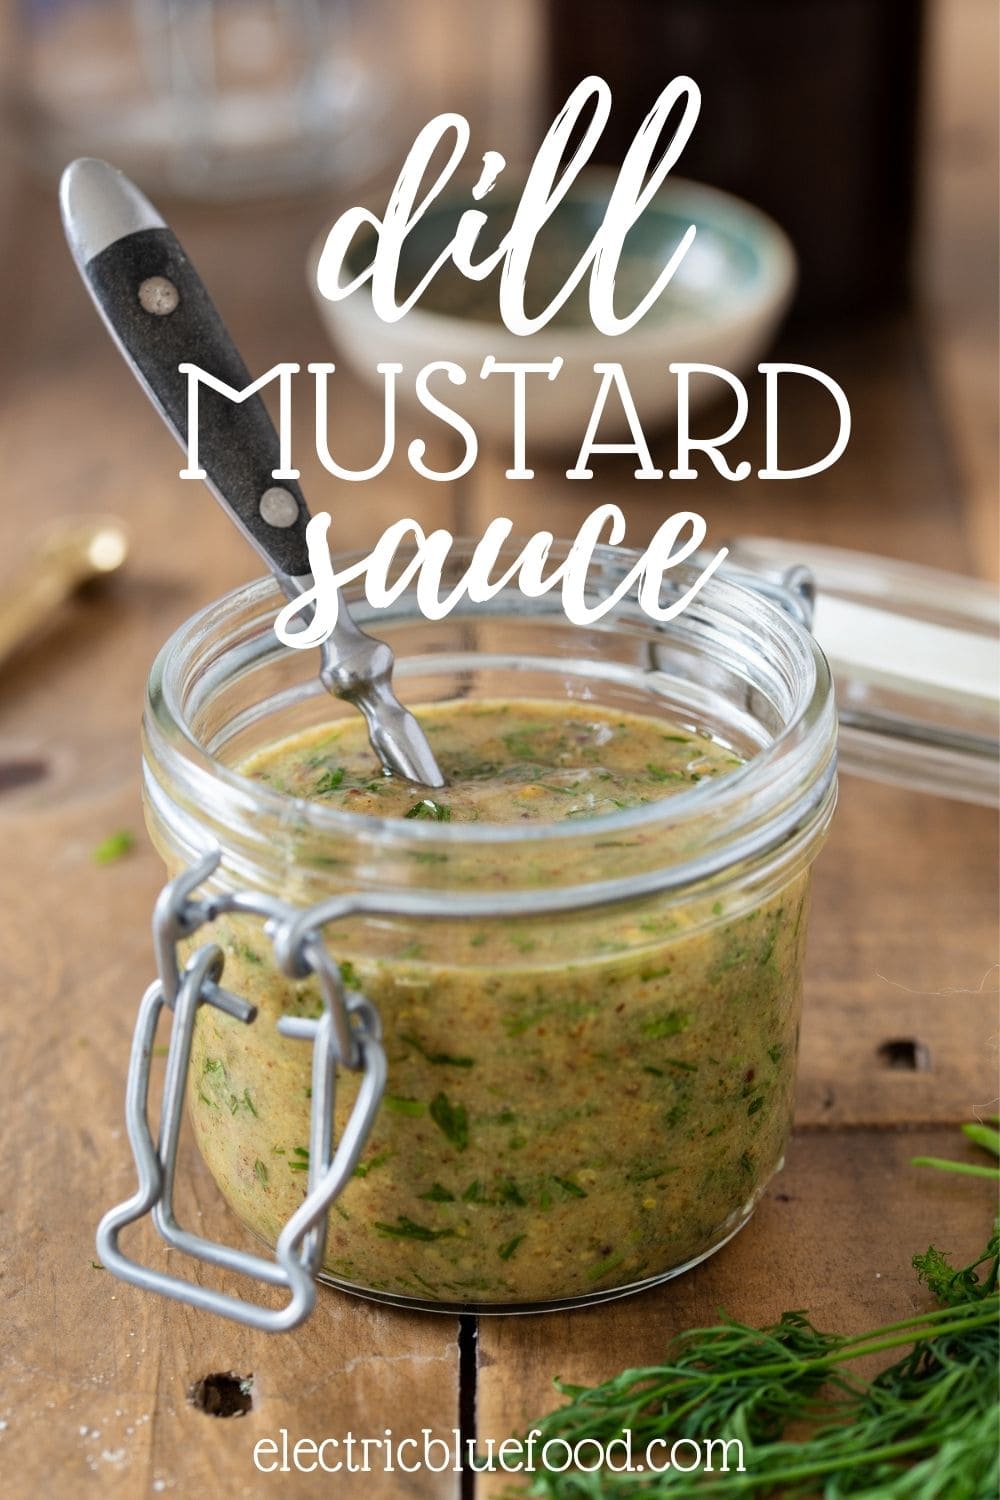 Swedish-style dill mustard sauce to use on smoked fish or as salad dressing. A mustard sauce with a sweet and sour quality and the herbal flavour of freshly minced dill.